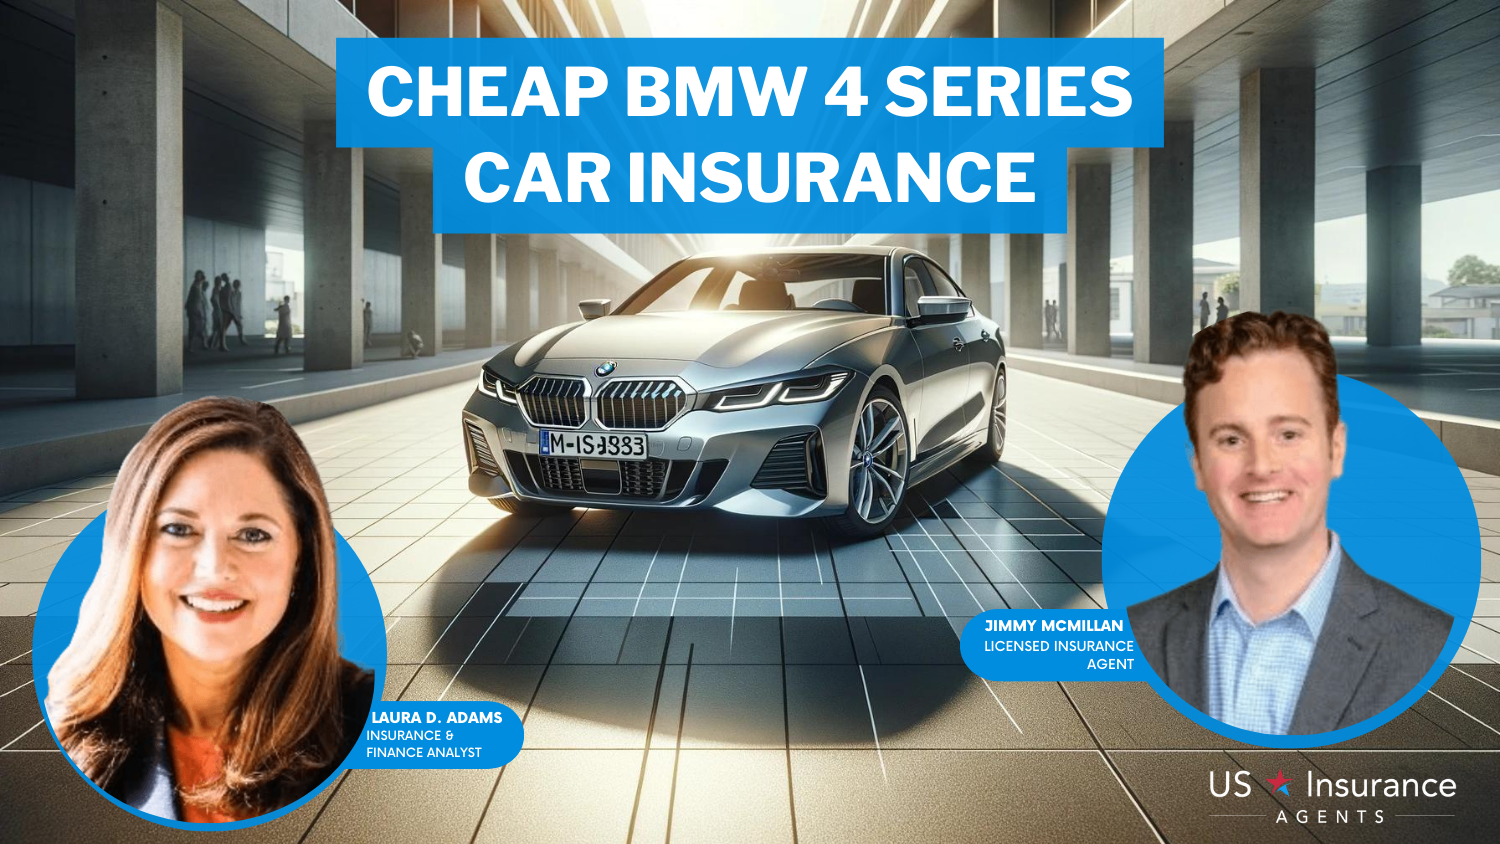 Cheap BMW 4 Series Car Insurance: Metromile, The Hartford, and AAA